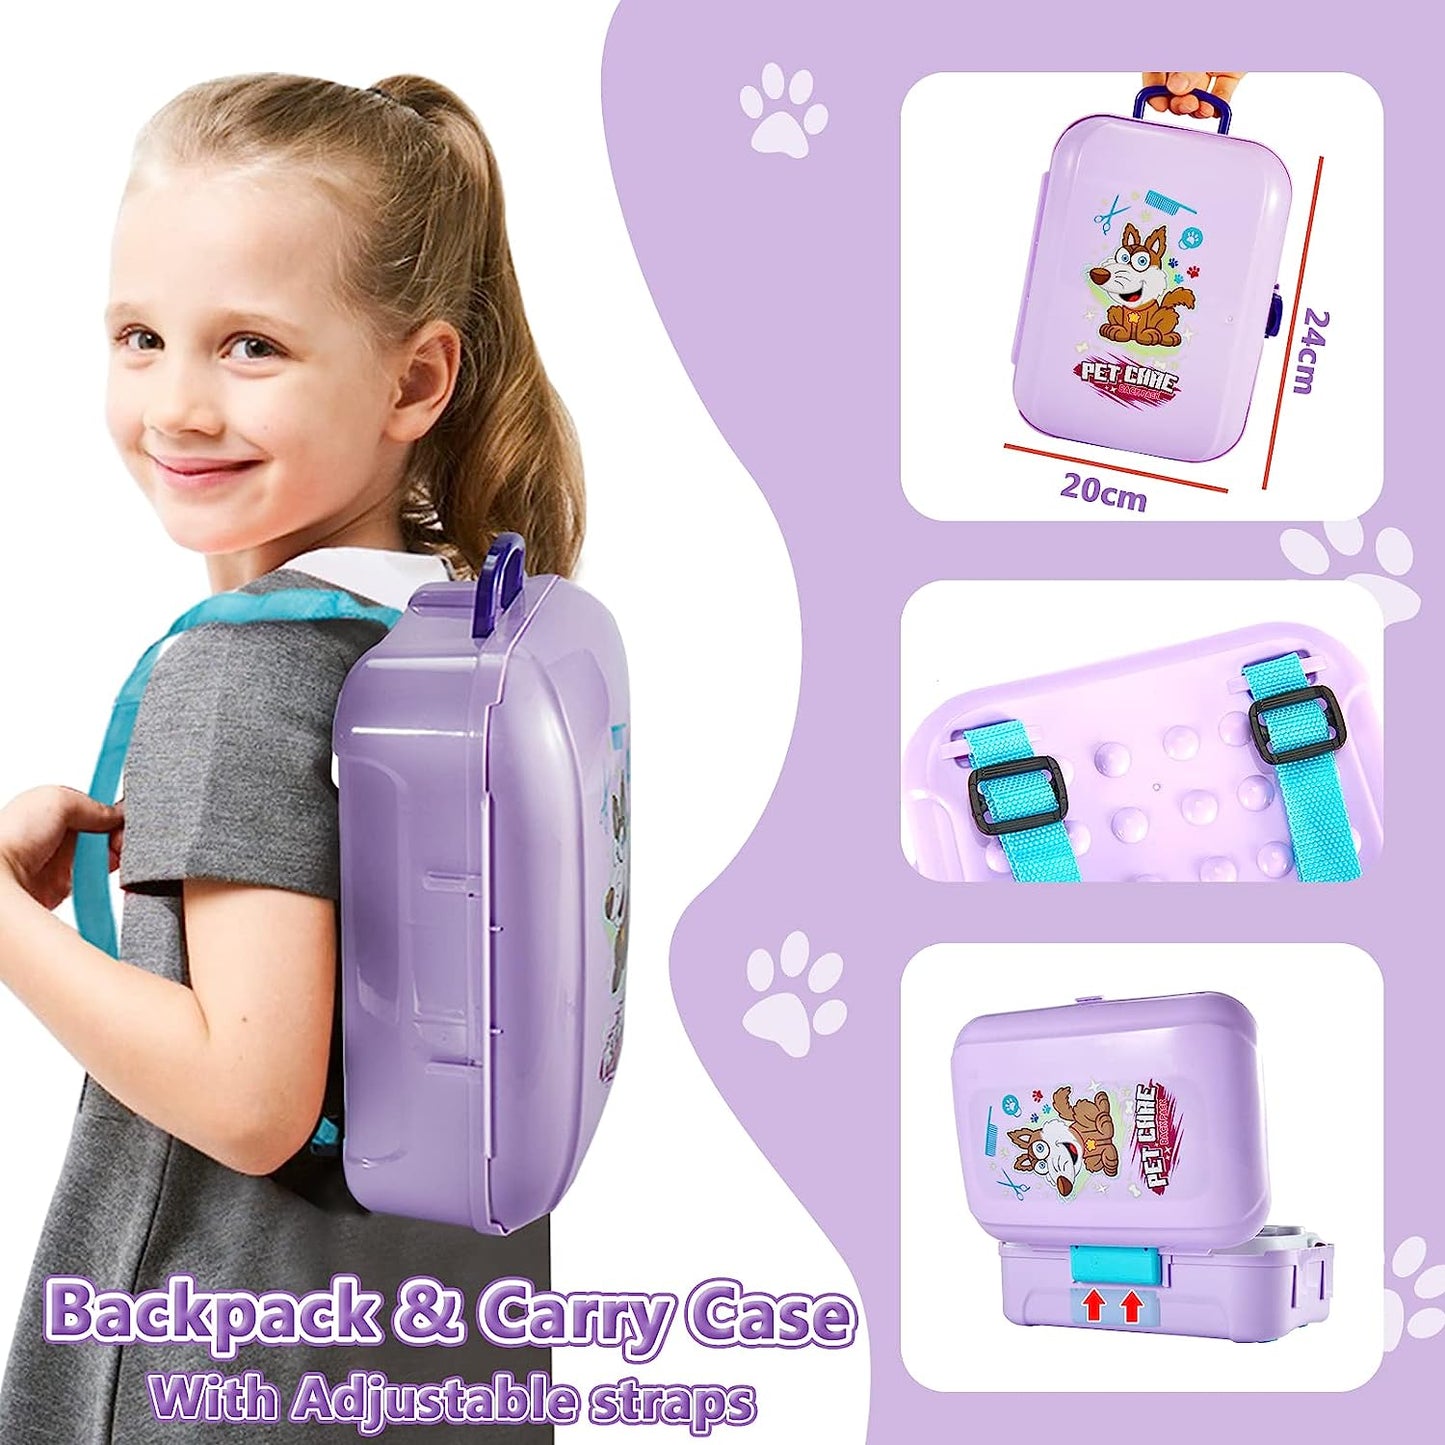 Kids Vet Kit Dog Grooming Toy Pet Care Role Play Games Animal Dolls Pretend Play Pet Carrier Set Toys 3 4 5 Year Old Girls Boys Children Gifts